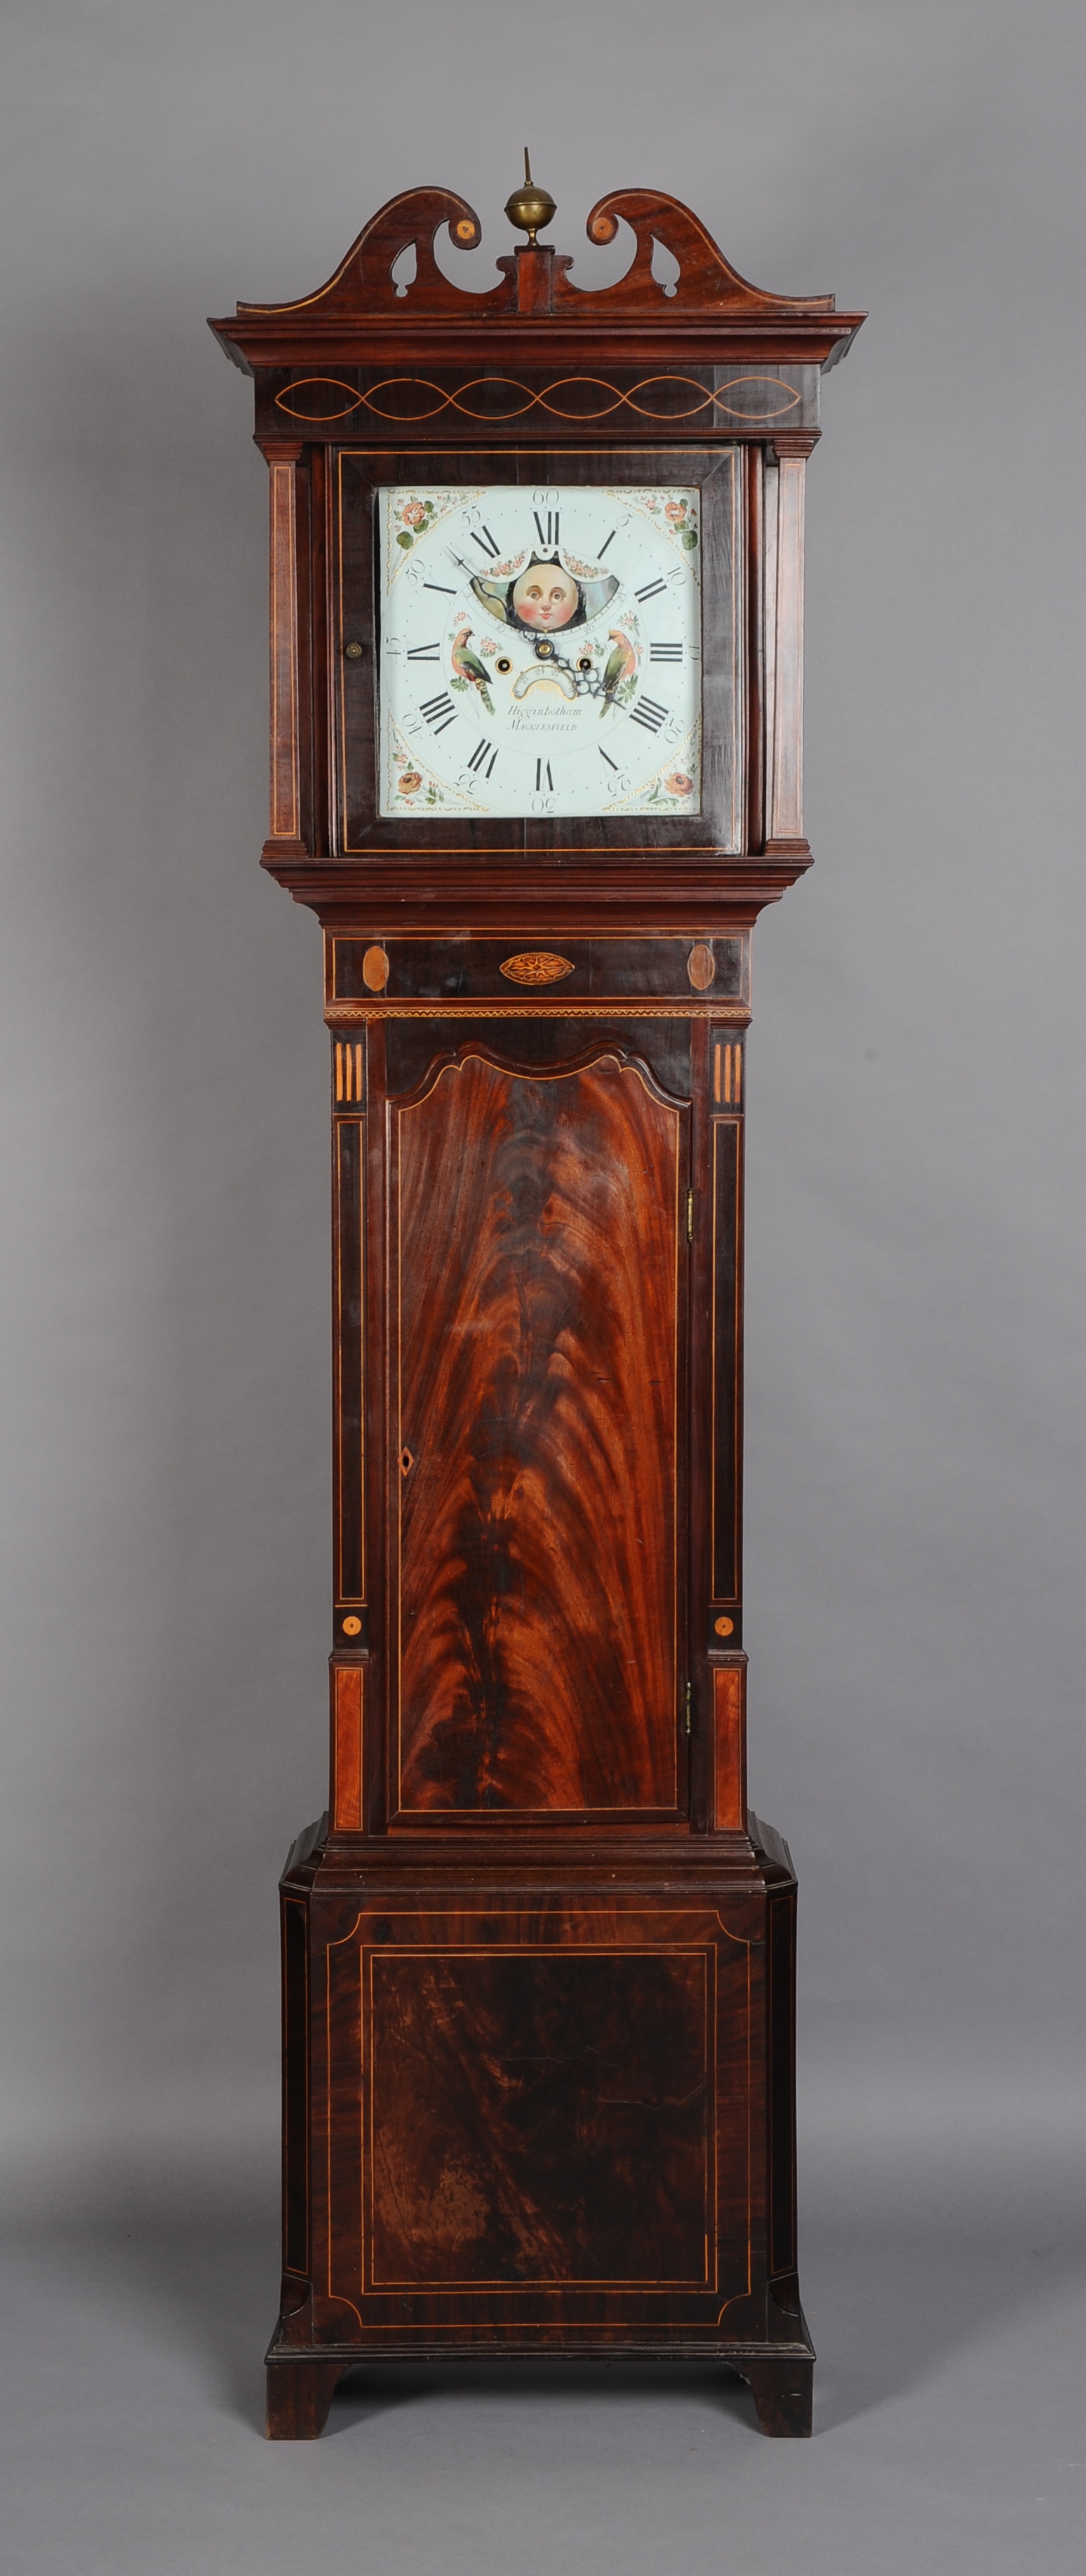 A GEORGE III FIGURED MAHOGANY AND INLAID LONGCASE CLOCK, the eight day movement striking on a